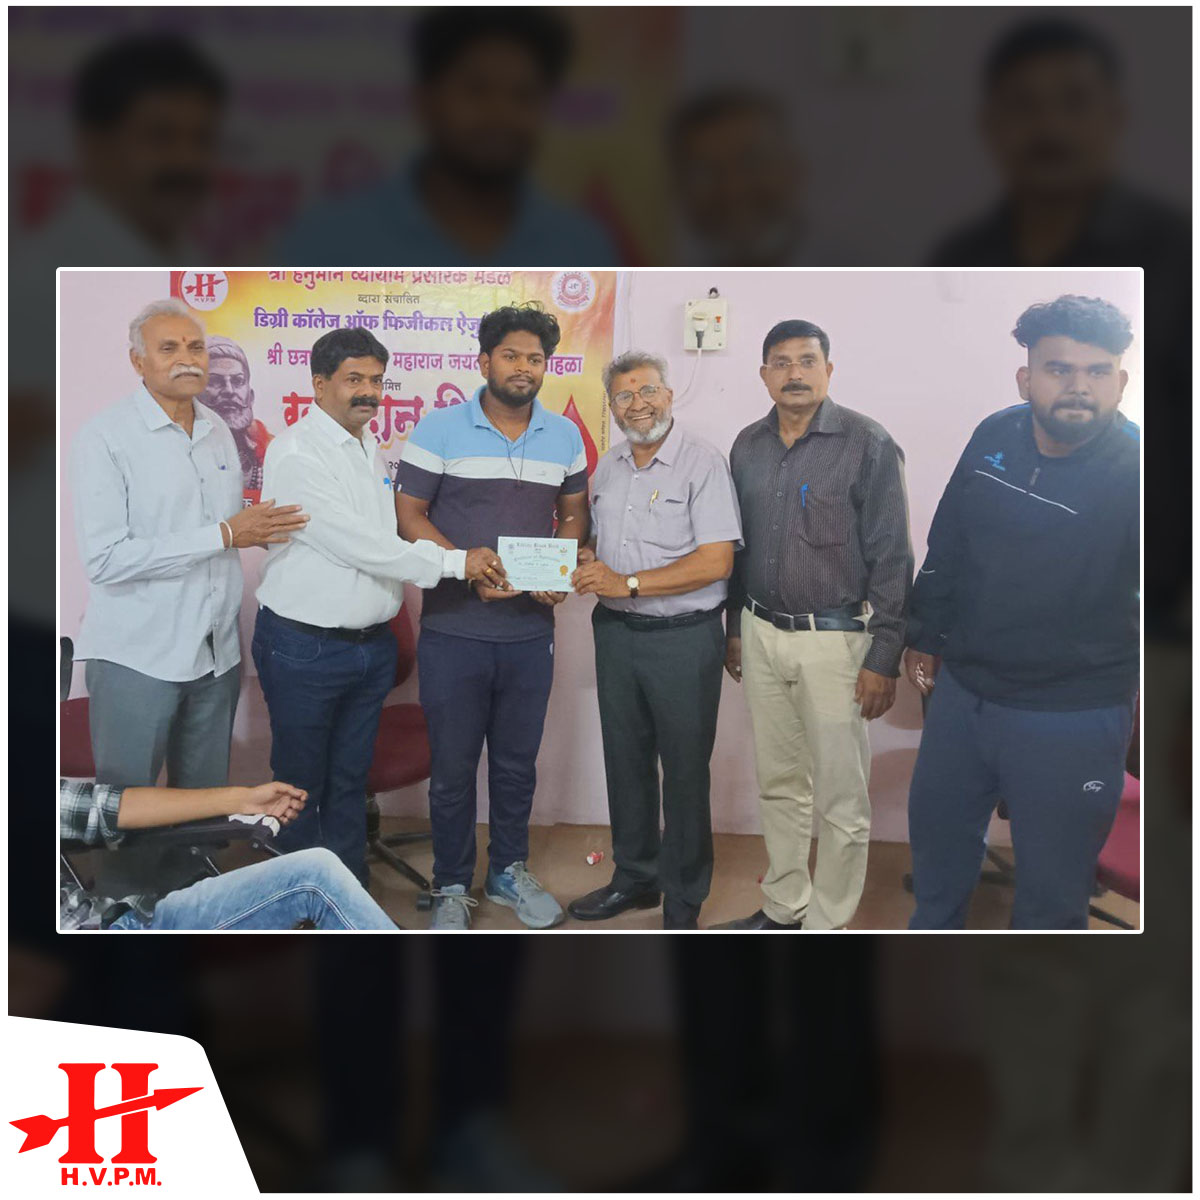 🎉 Celebrating the 394th birth anniversary of Raja Chhatrapati Shivaji Maharaj with a noble cause! 🩸 Our Degree College of Physical Education, under the guidance of Dr. Madhukar Burnase, organized a grand blood donation camp at the council hall. 🙌 #BloodDonation #NobleCause